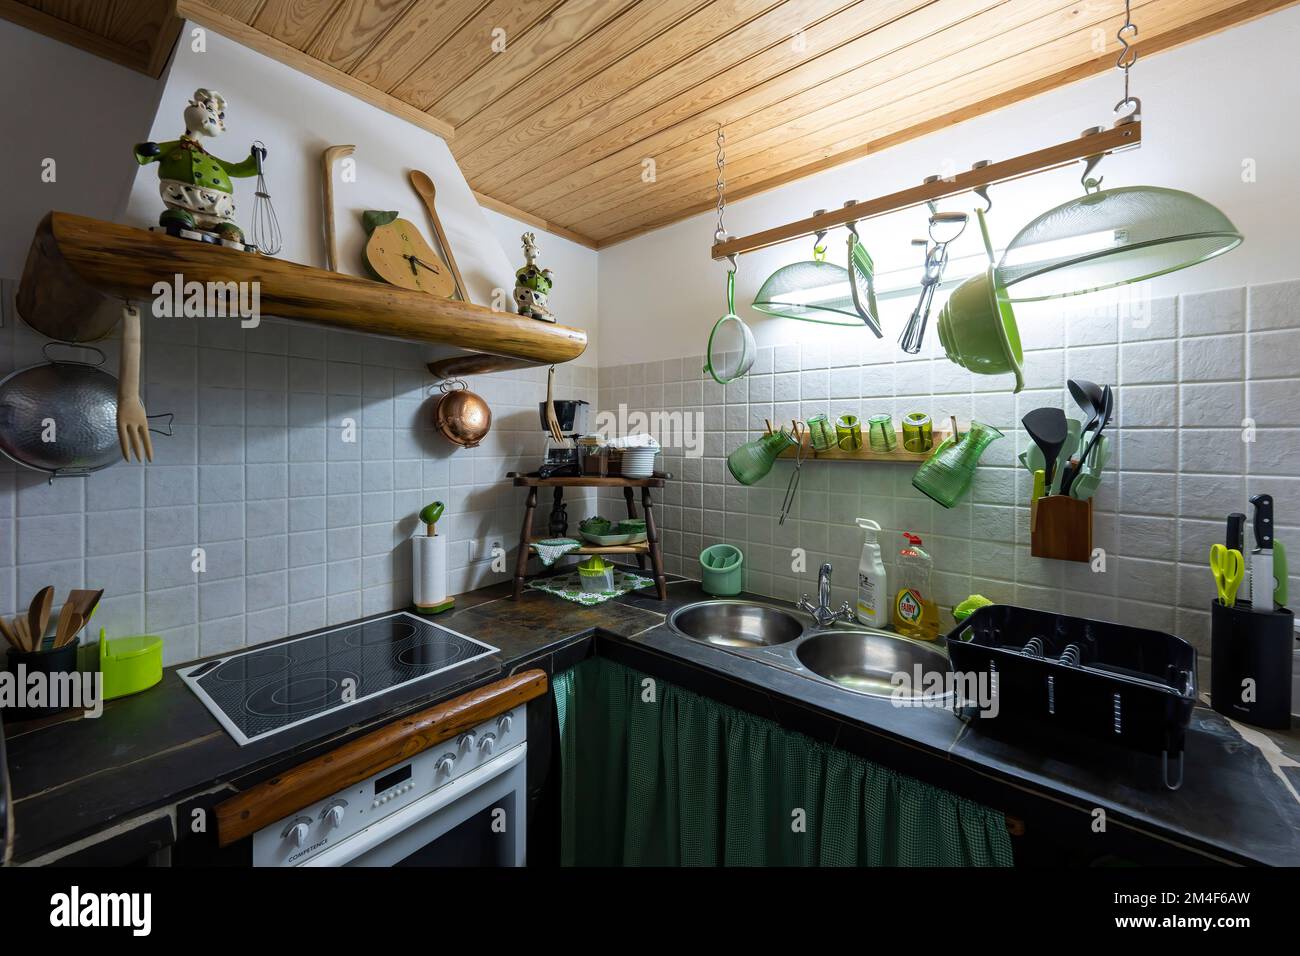 Small rustic house's retro kitchen with white tiles and wood ceiling Stock Photo